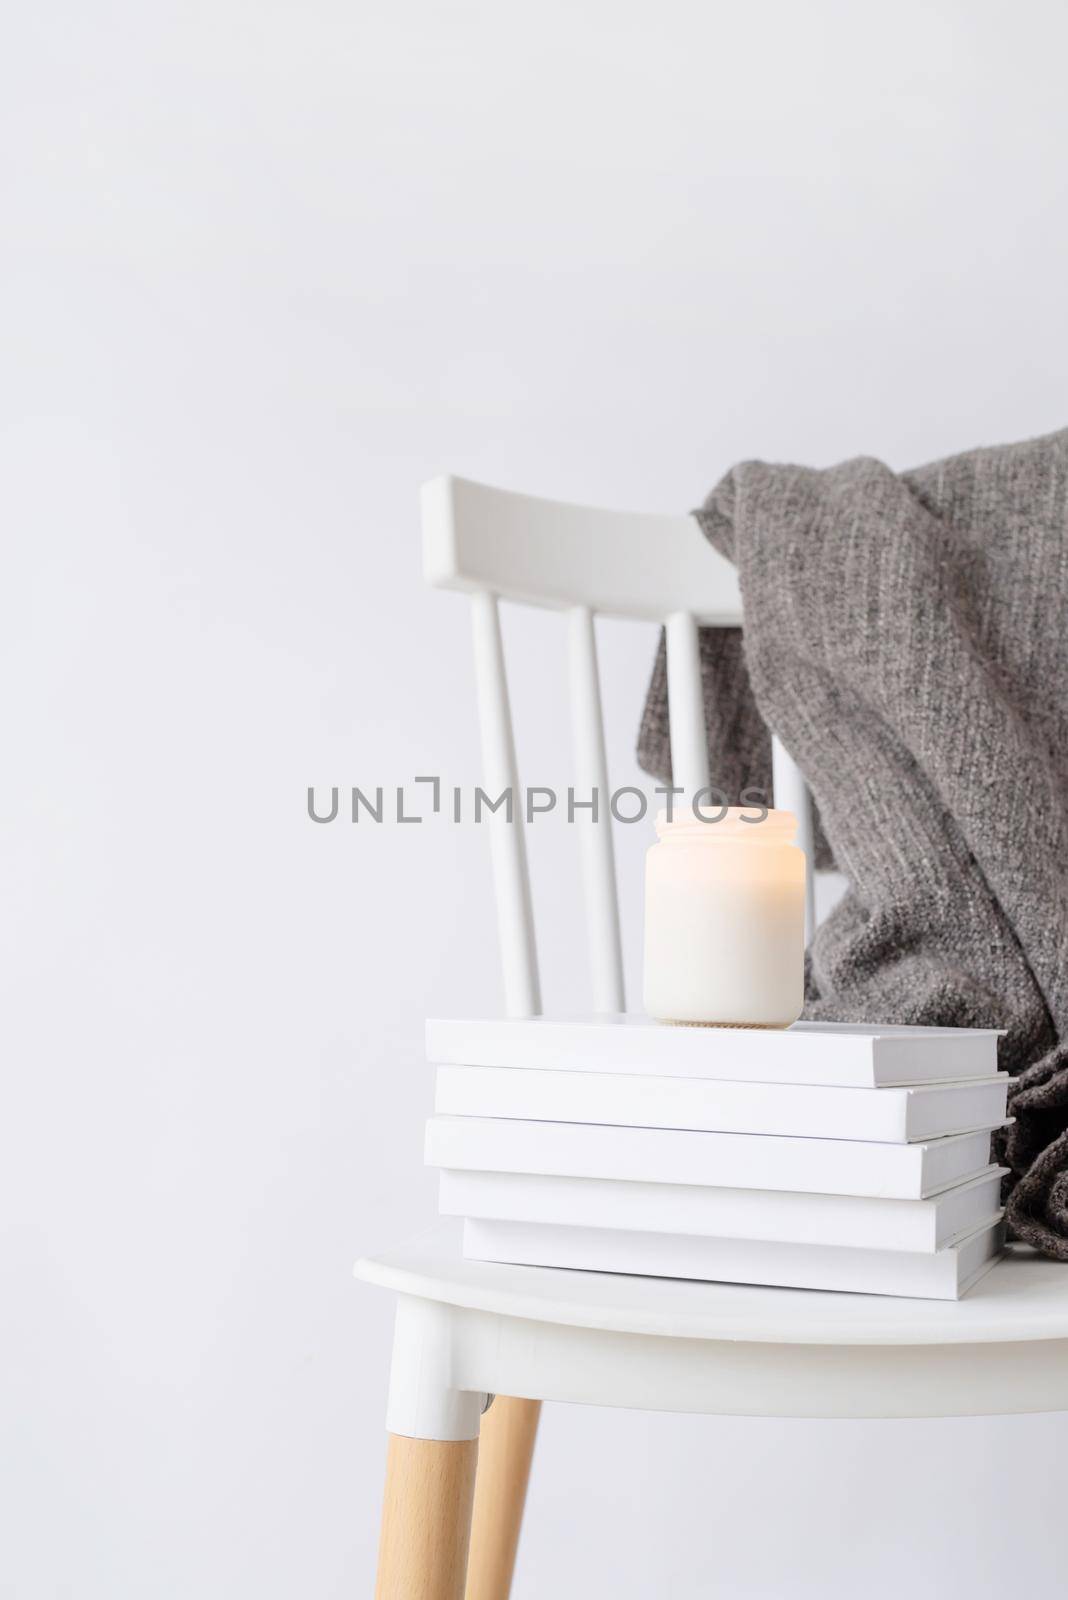 Hello fall. Cozy warm image. Candle mockup design. Cozy interior with white chair, warm plaid, books and autumn leaves. Burning candle mockup design